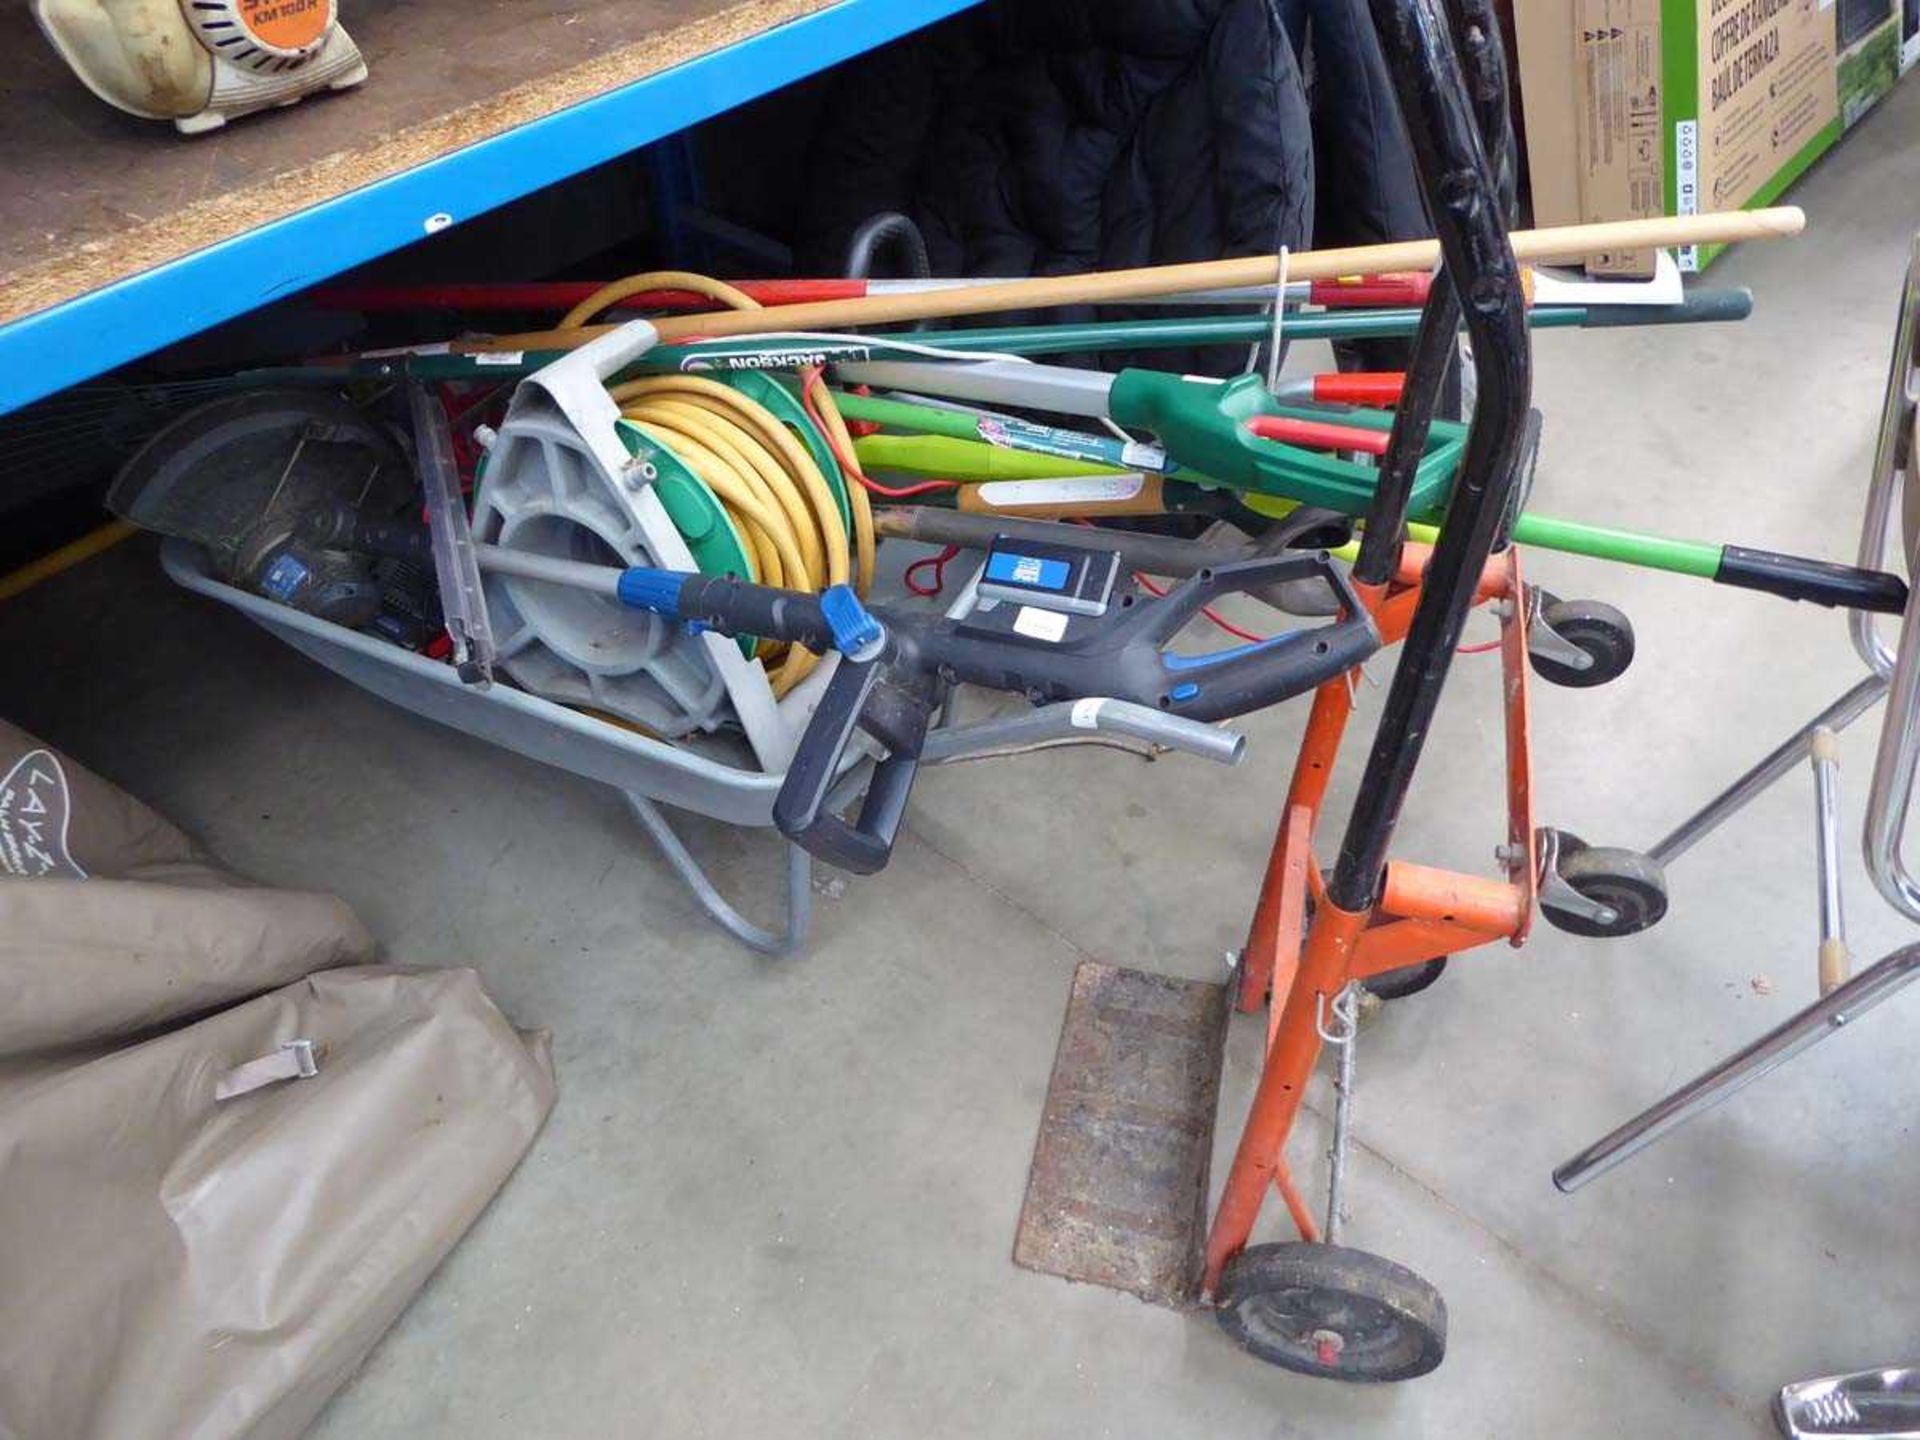 Galvanised wheelbarrow containing various garden tools including battery powered hedge cutters,